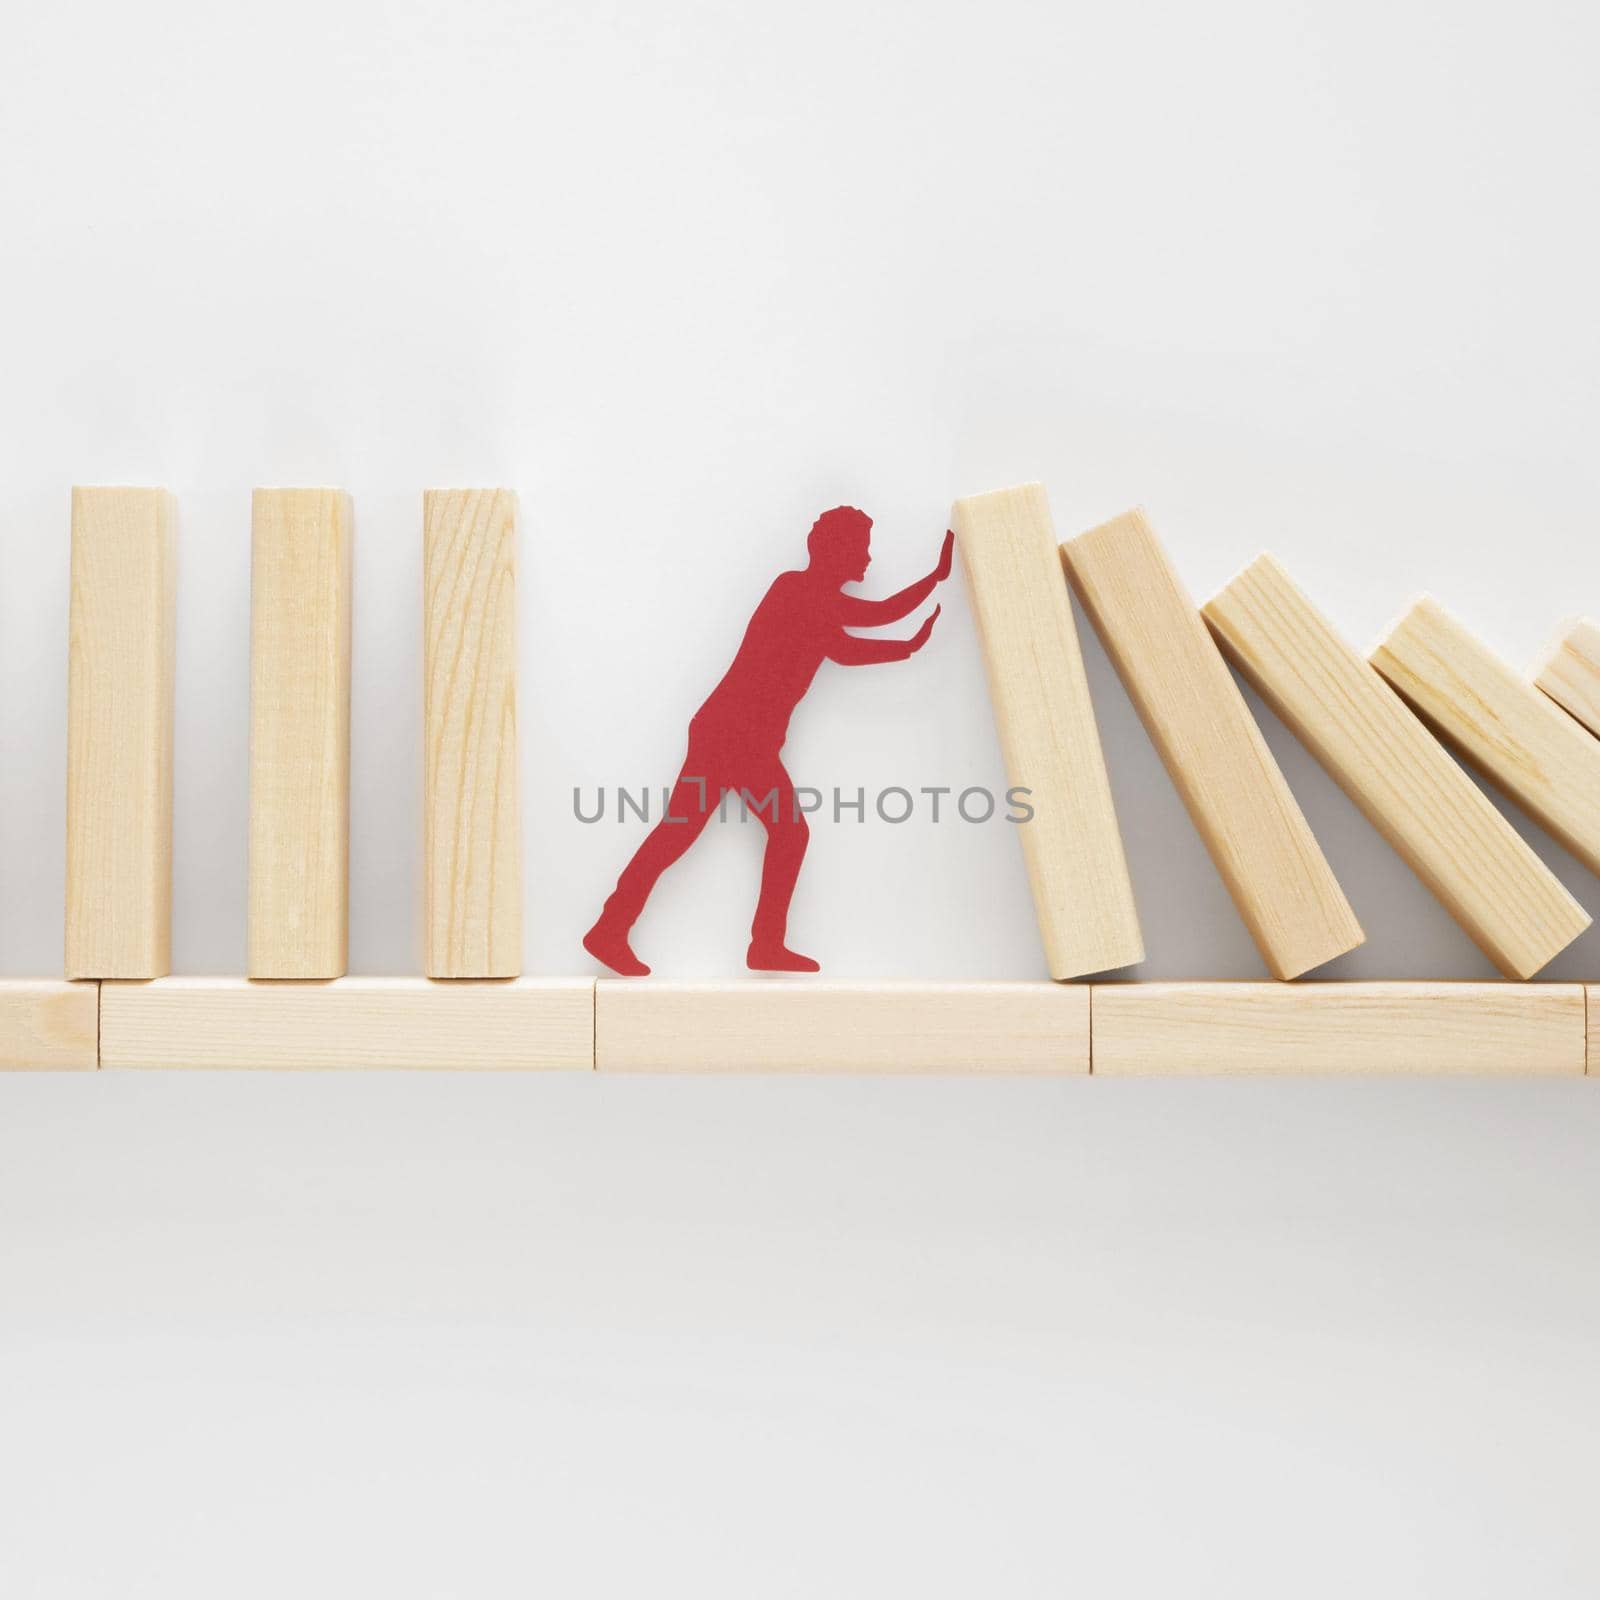 abstract representation financial crisis with wooden pieces. High quality beautiful photo concept by Zahard